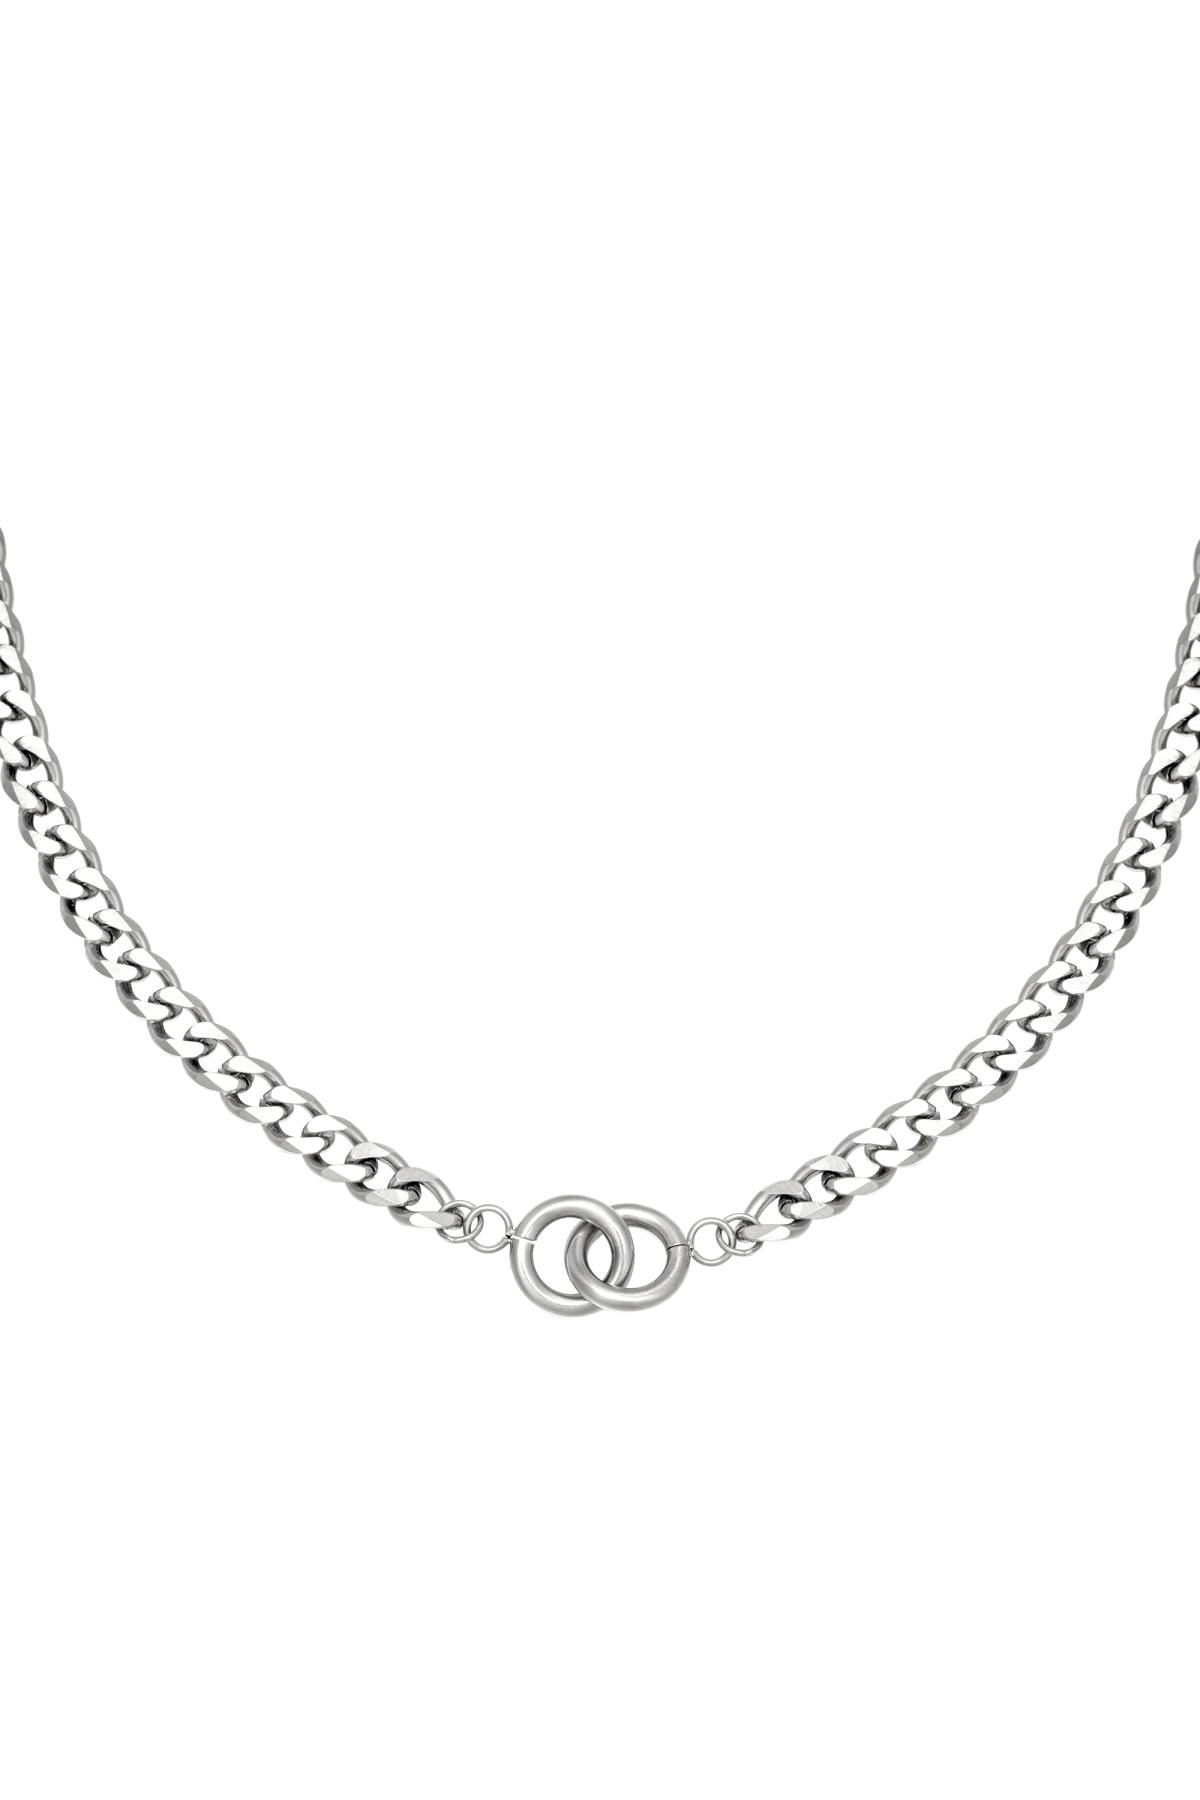 Necklace Intertwined Silver Stainless Steel